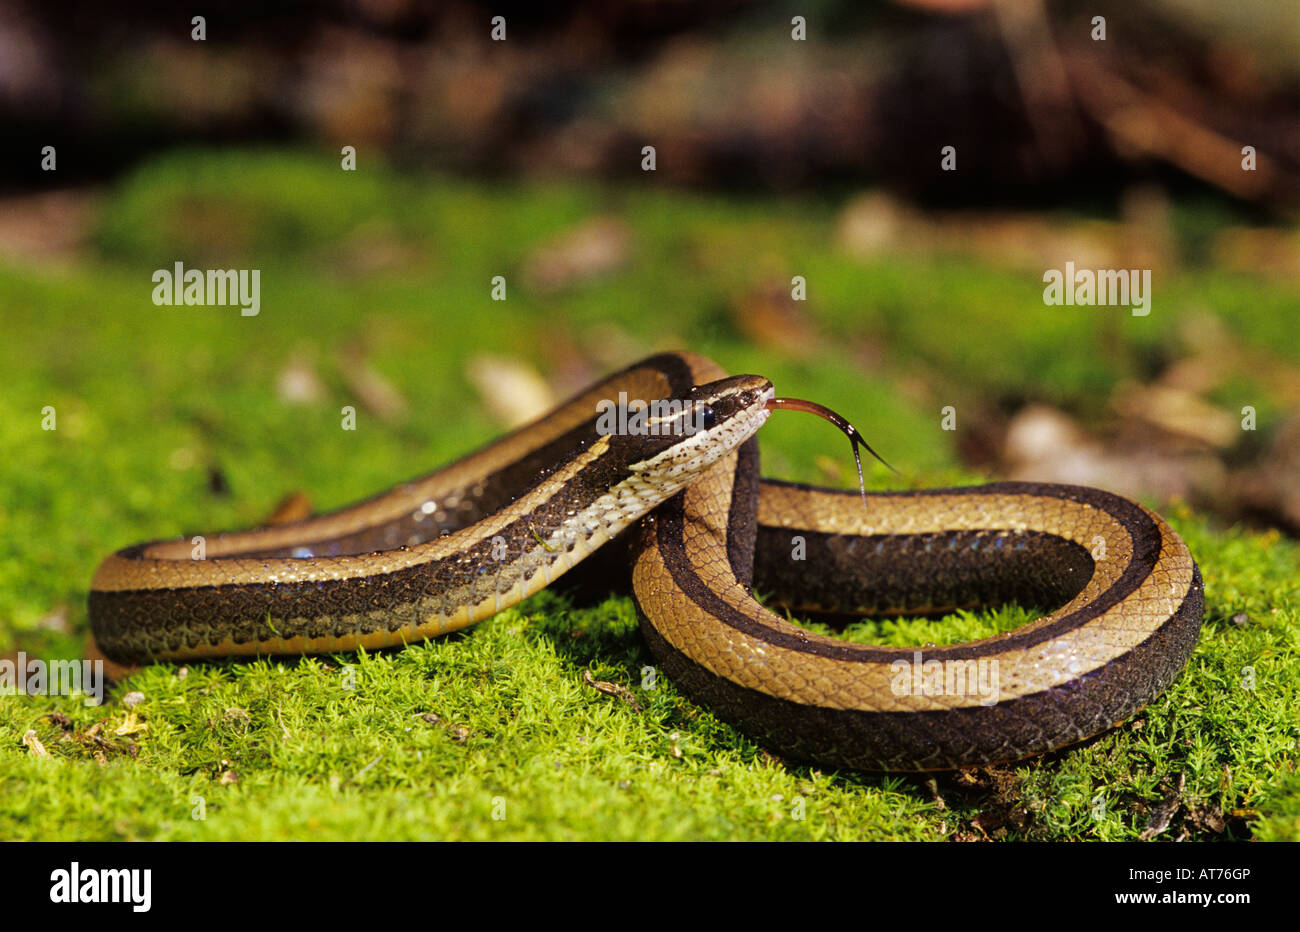 Black-Striped Snake Coniophanes imperialis adult on moss Rio Grande Valley Texas USA Stock Photo